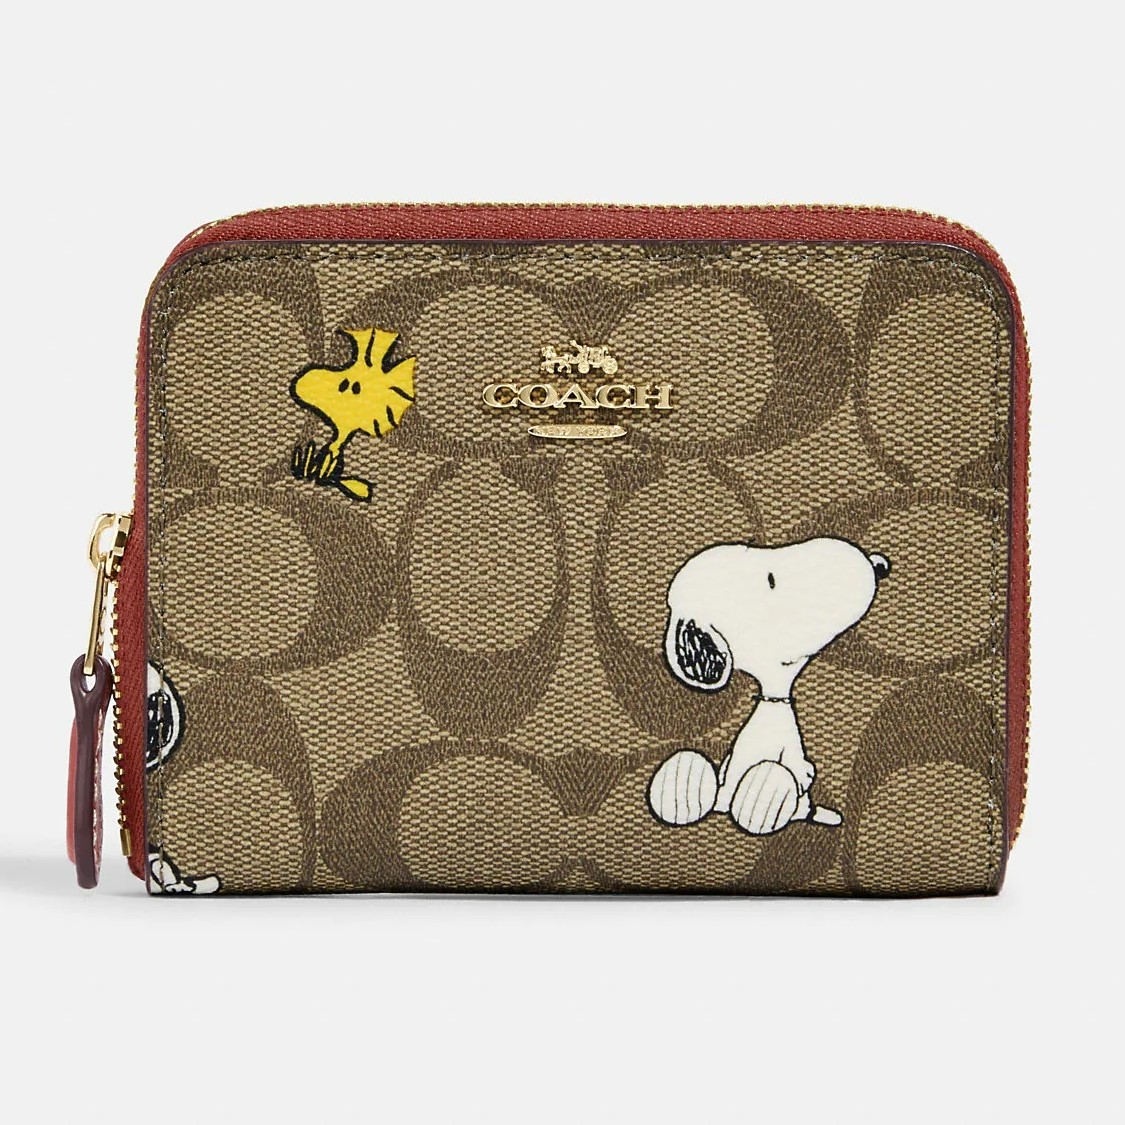 VÍ NỮ NGẮN CẦM TAY NÂU SÁNG COACH X PEANUTS SMALL ZIP AROUND WALLET IN SIGNATURE CANVAS WITH SNOOPY PRESENTS PRINT 1